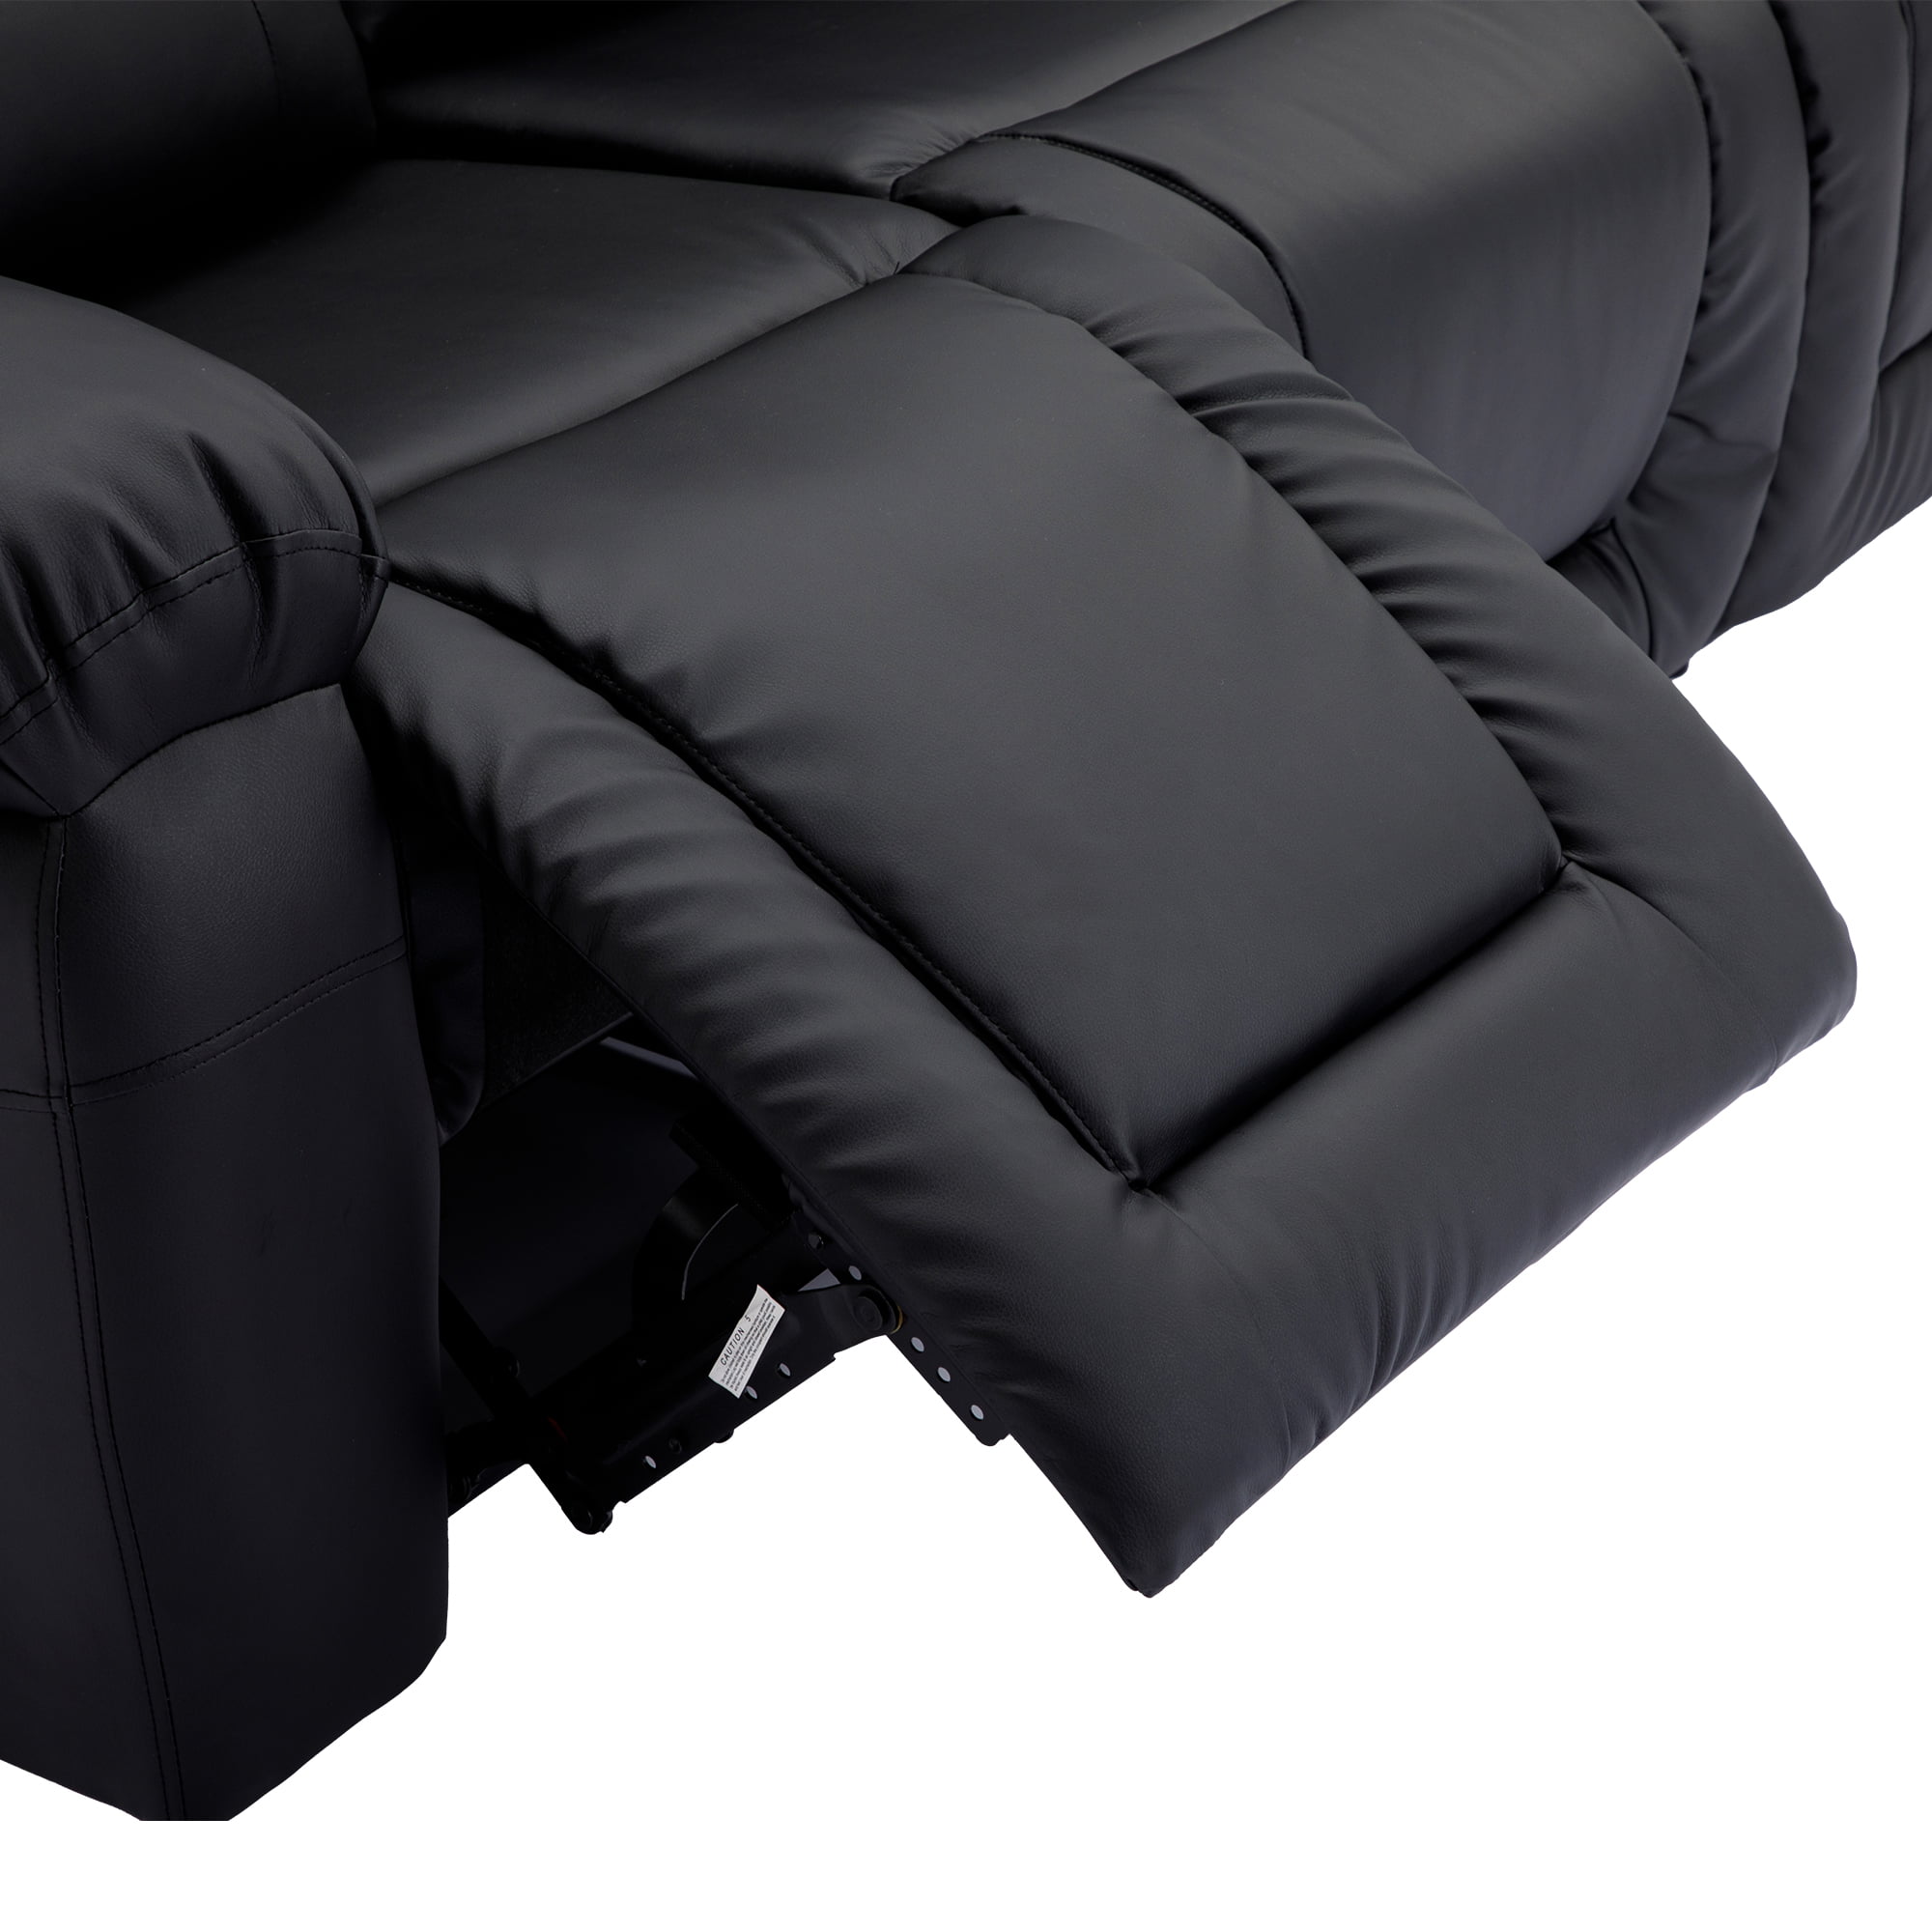 3 Seat Home Theater Seating - PP302955AAB